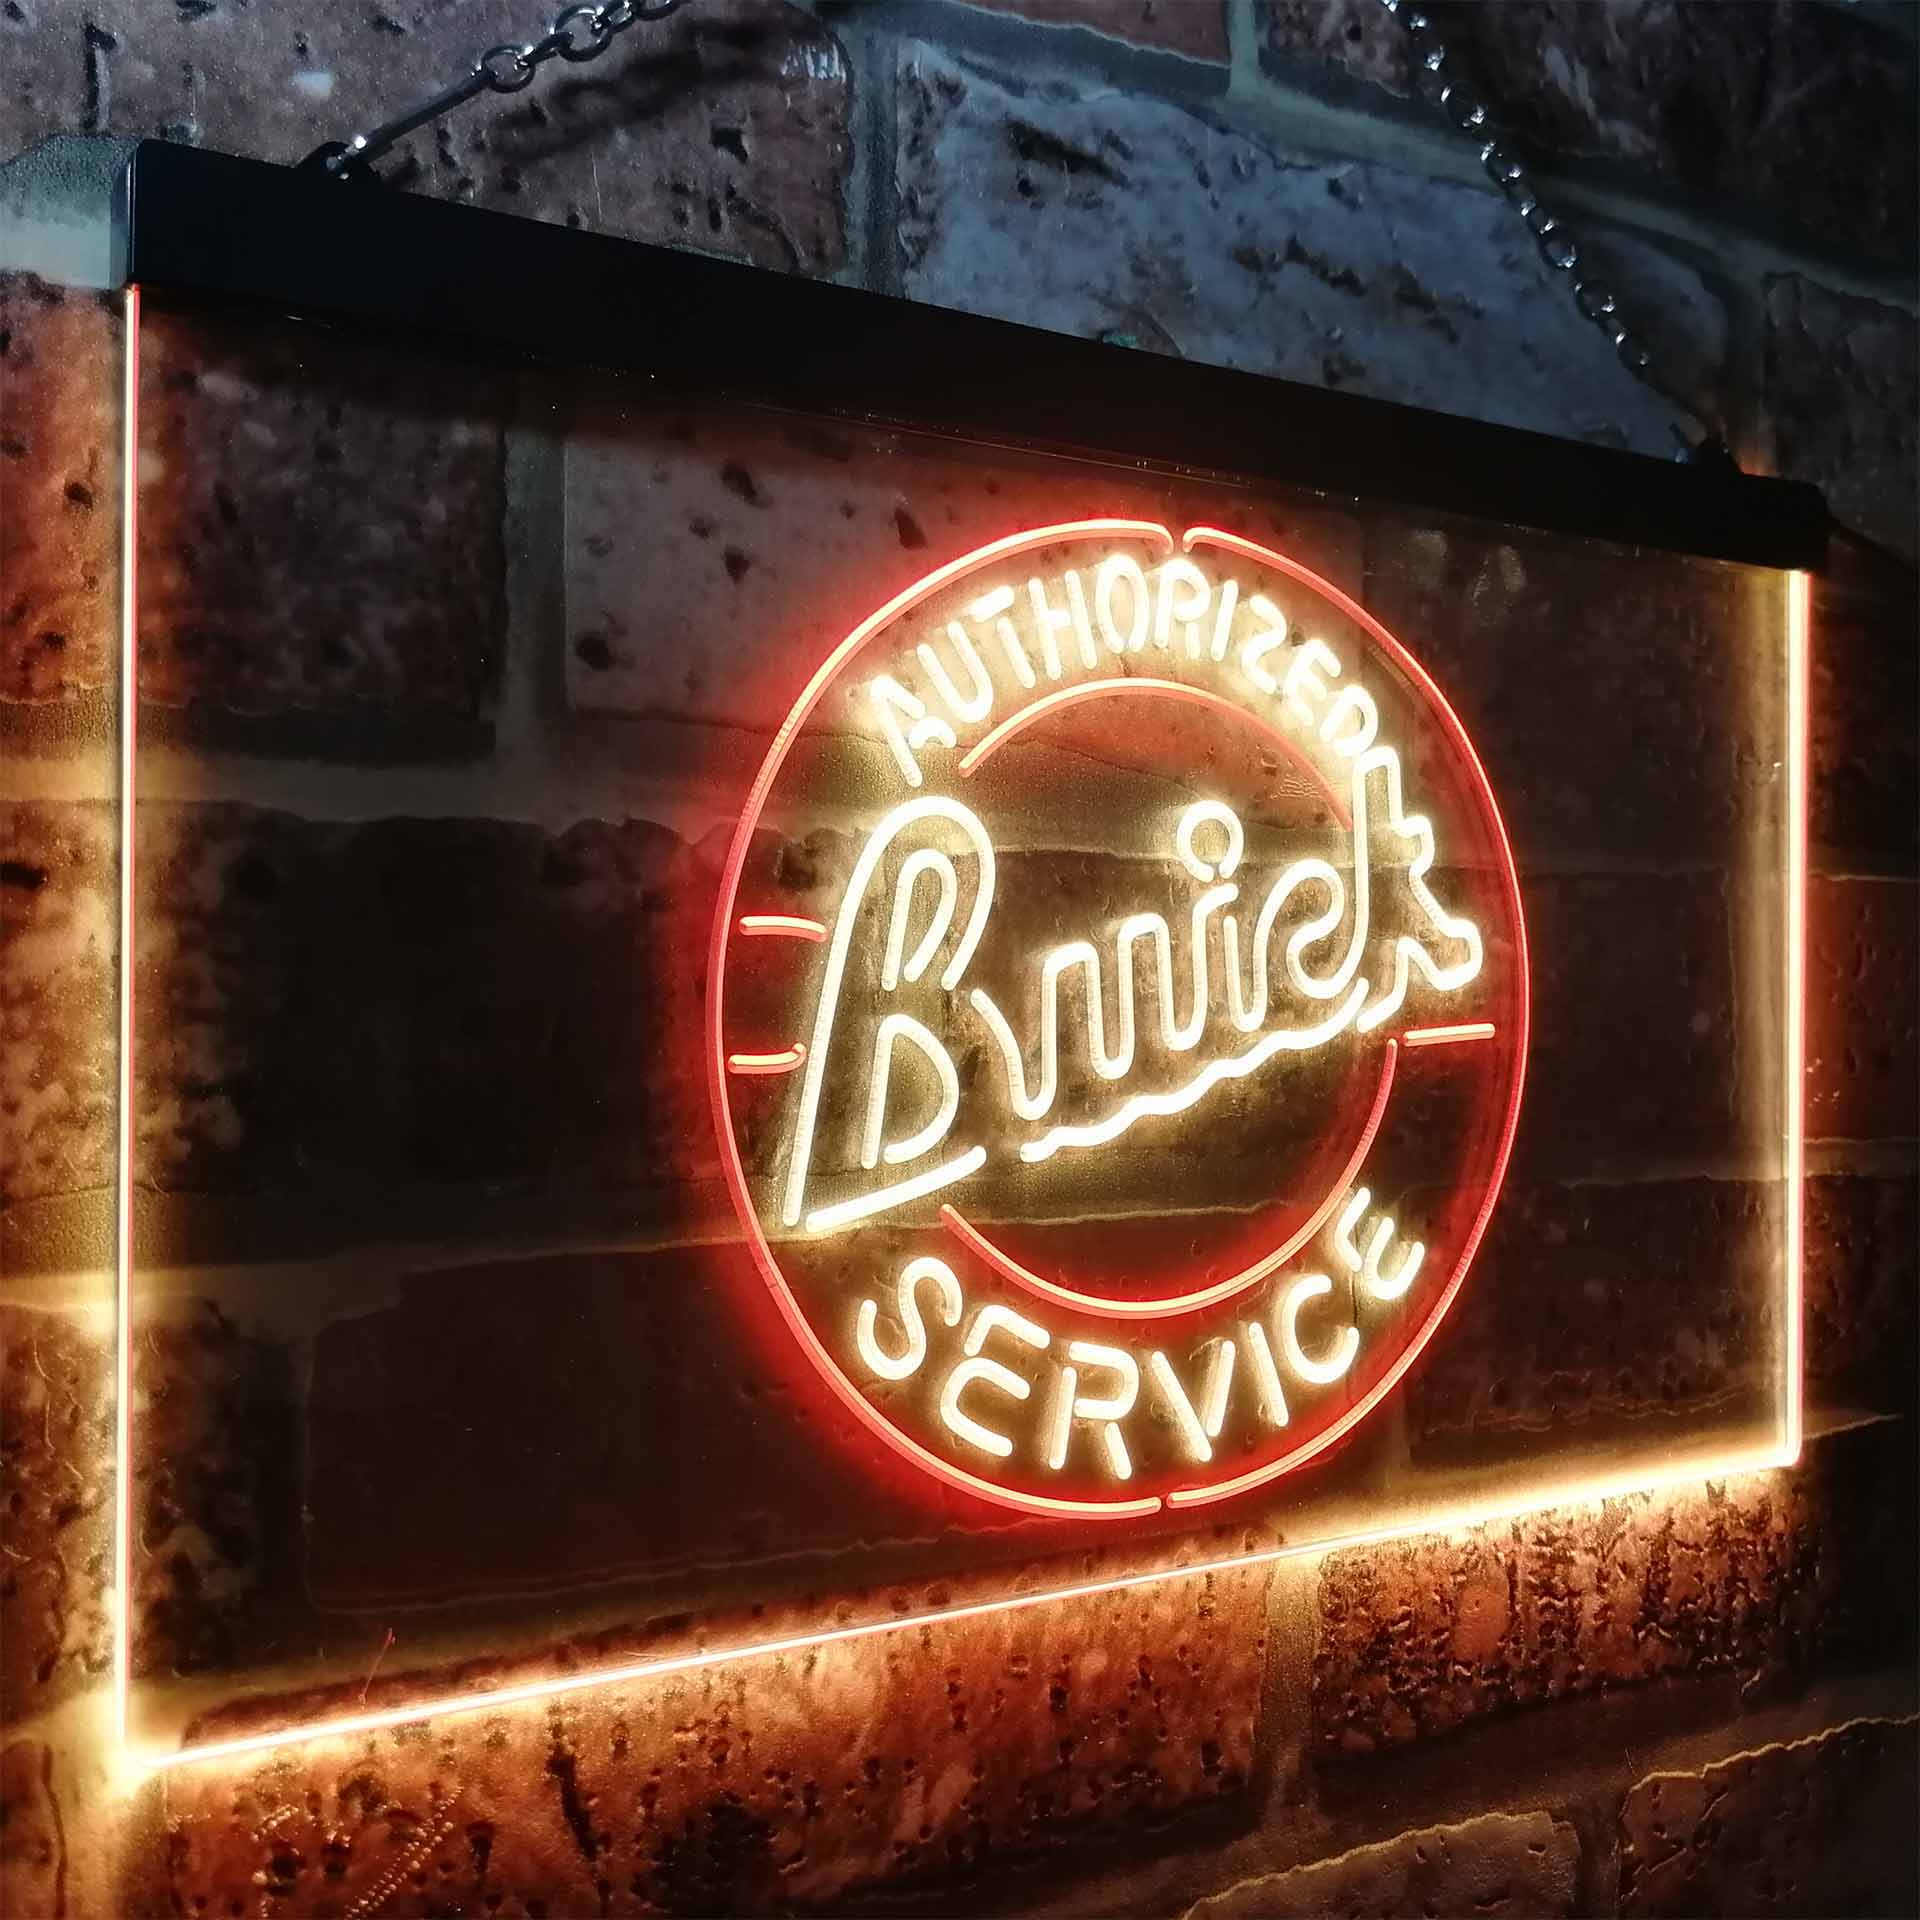 Buick Car Service Neon LED Sign